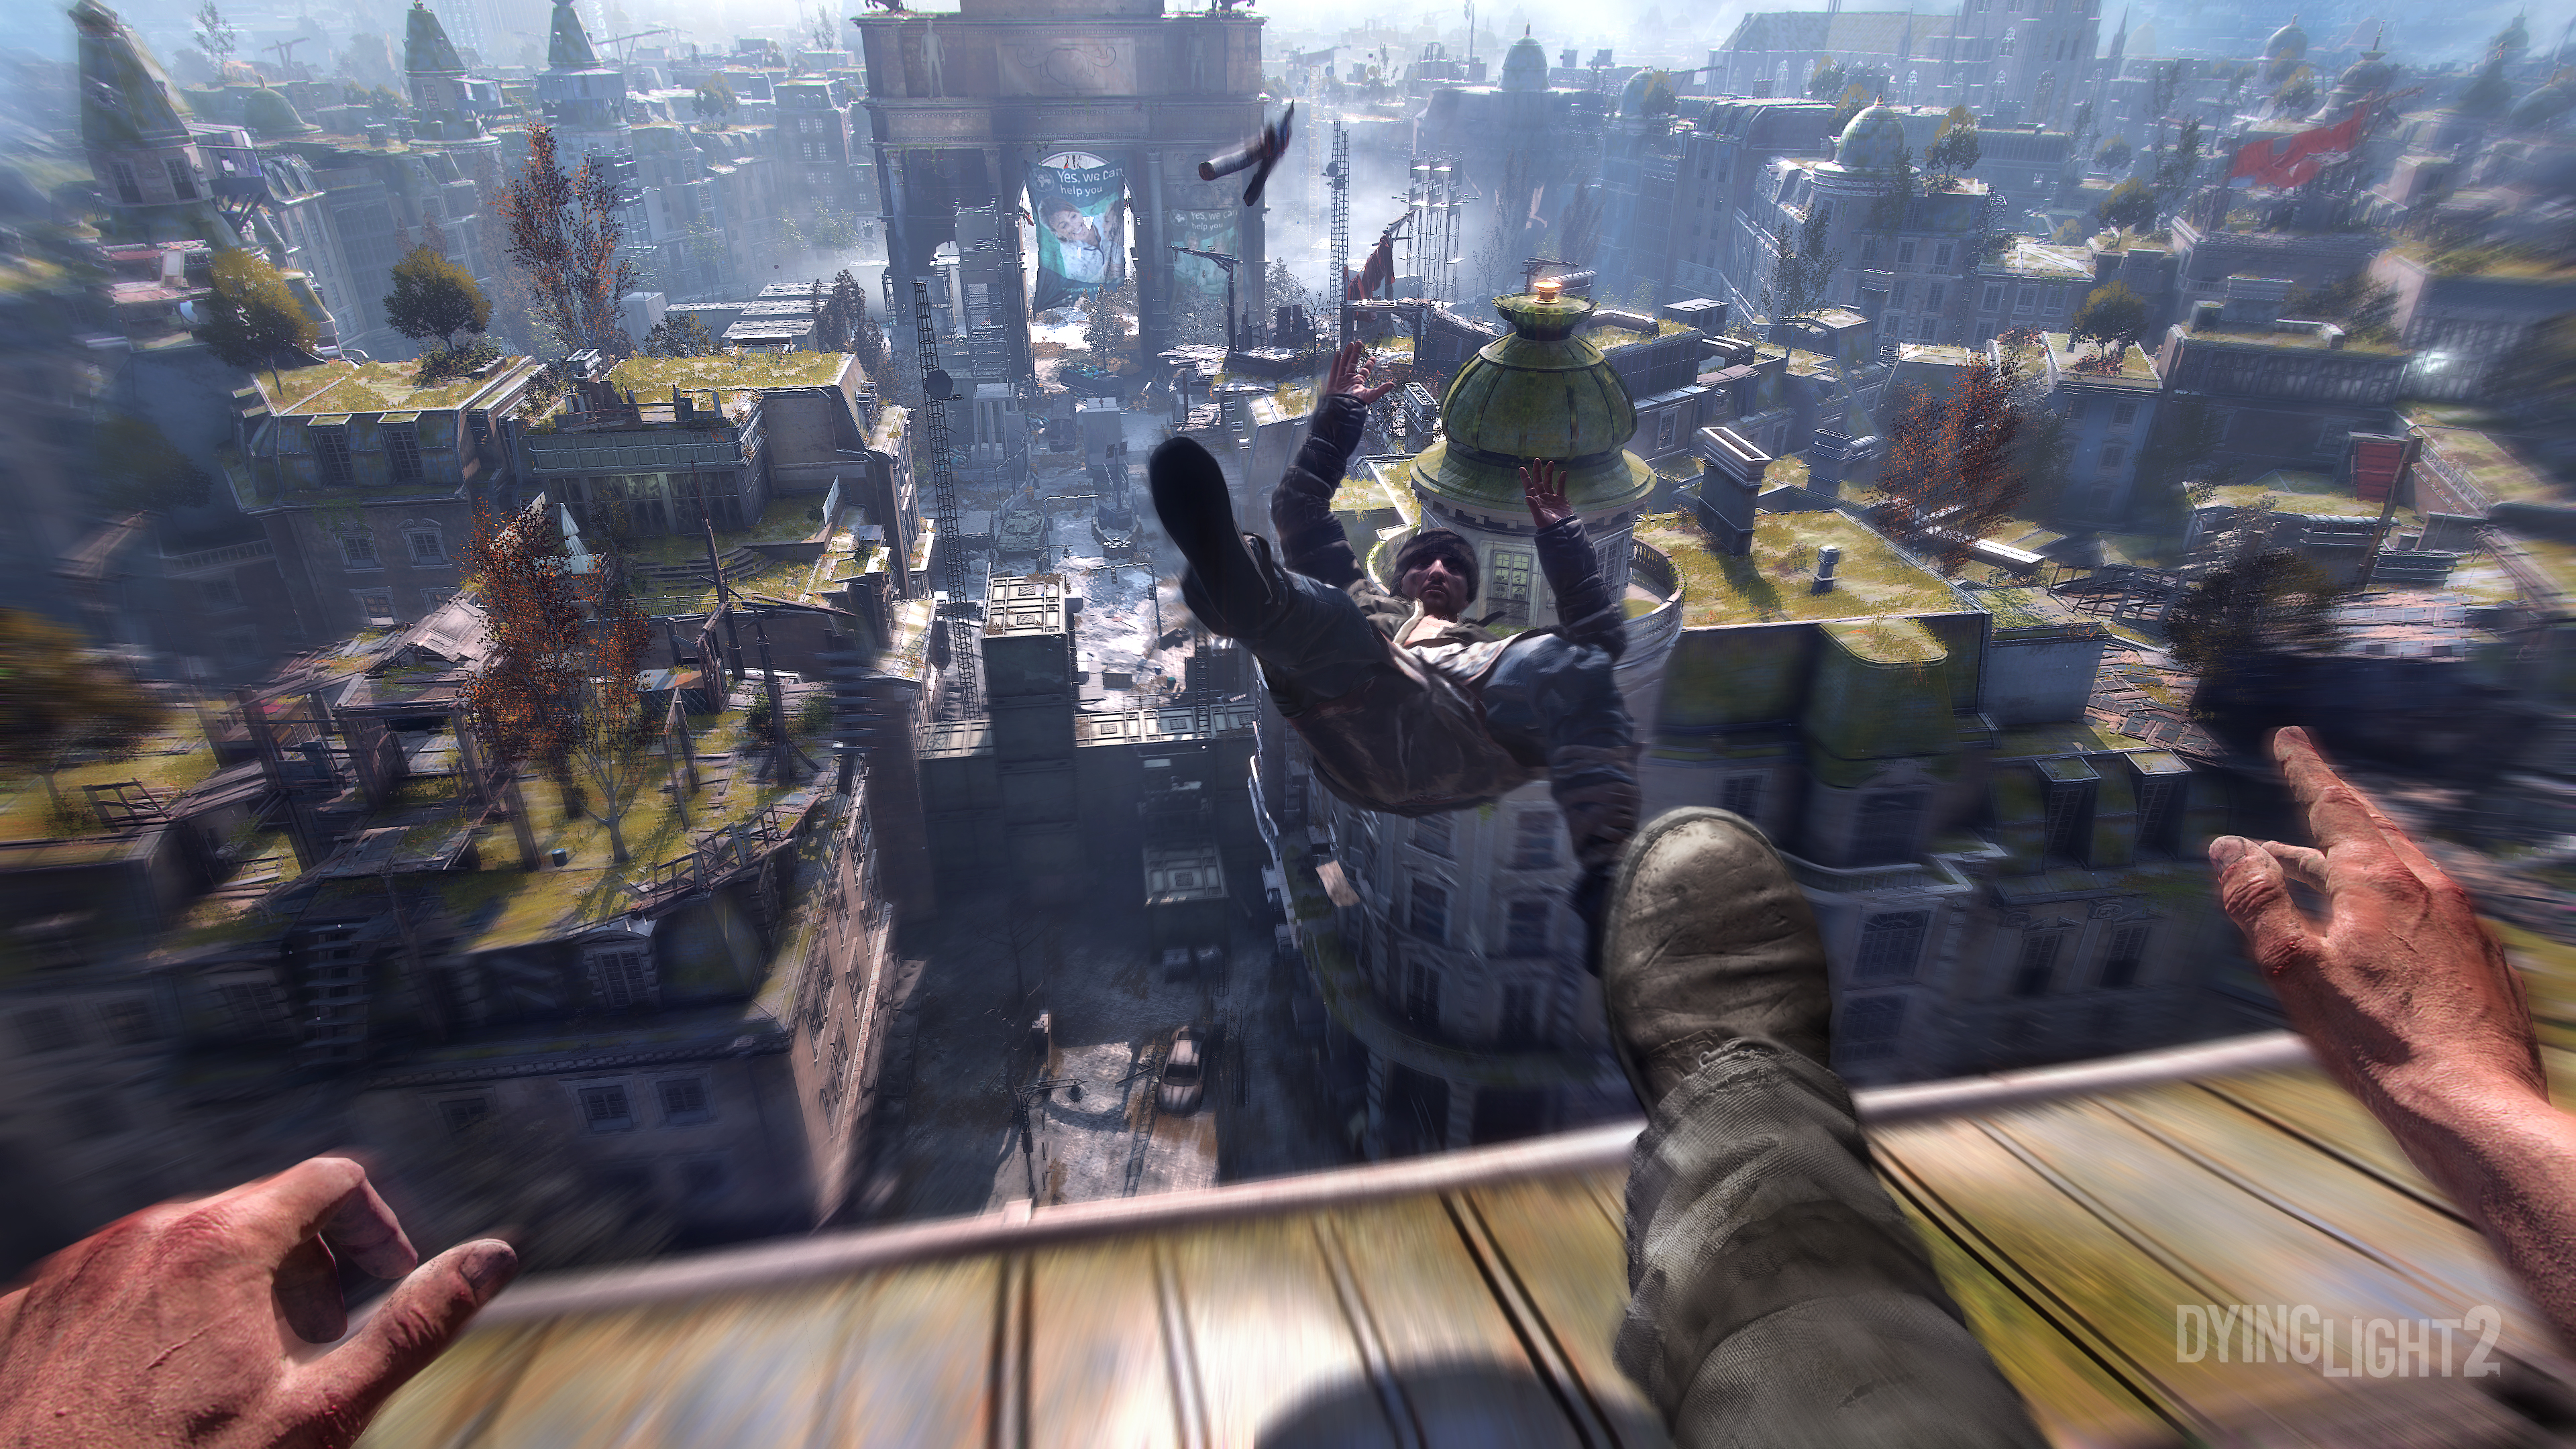 Dying Light 2 dev says 'we game too early' | Gamer